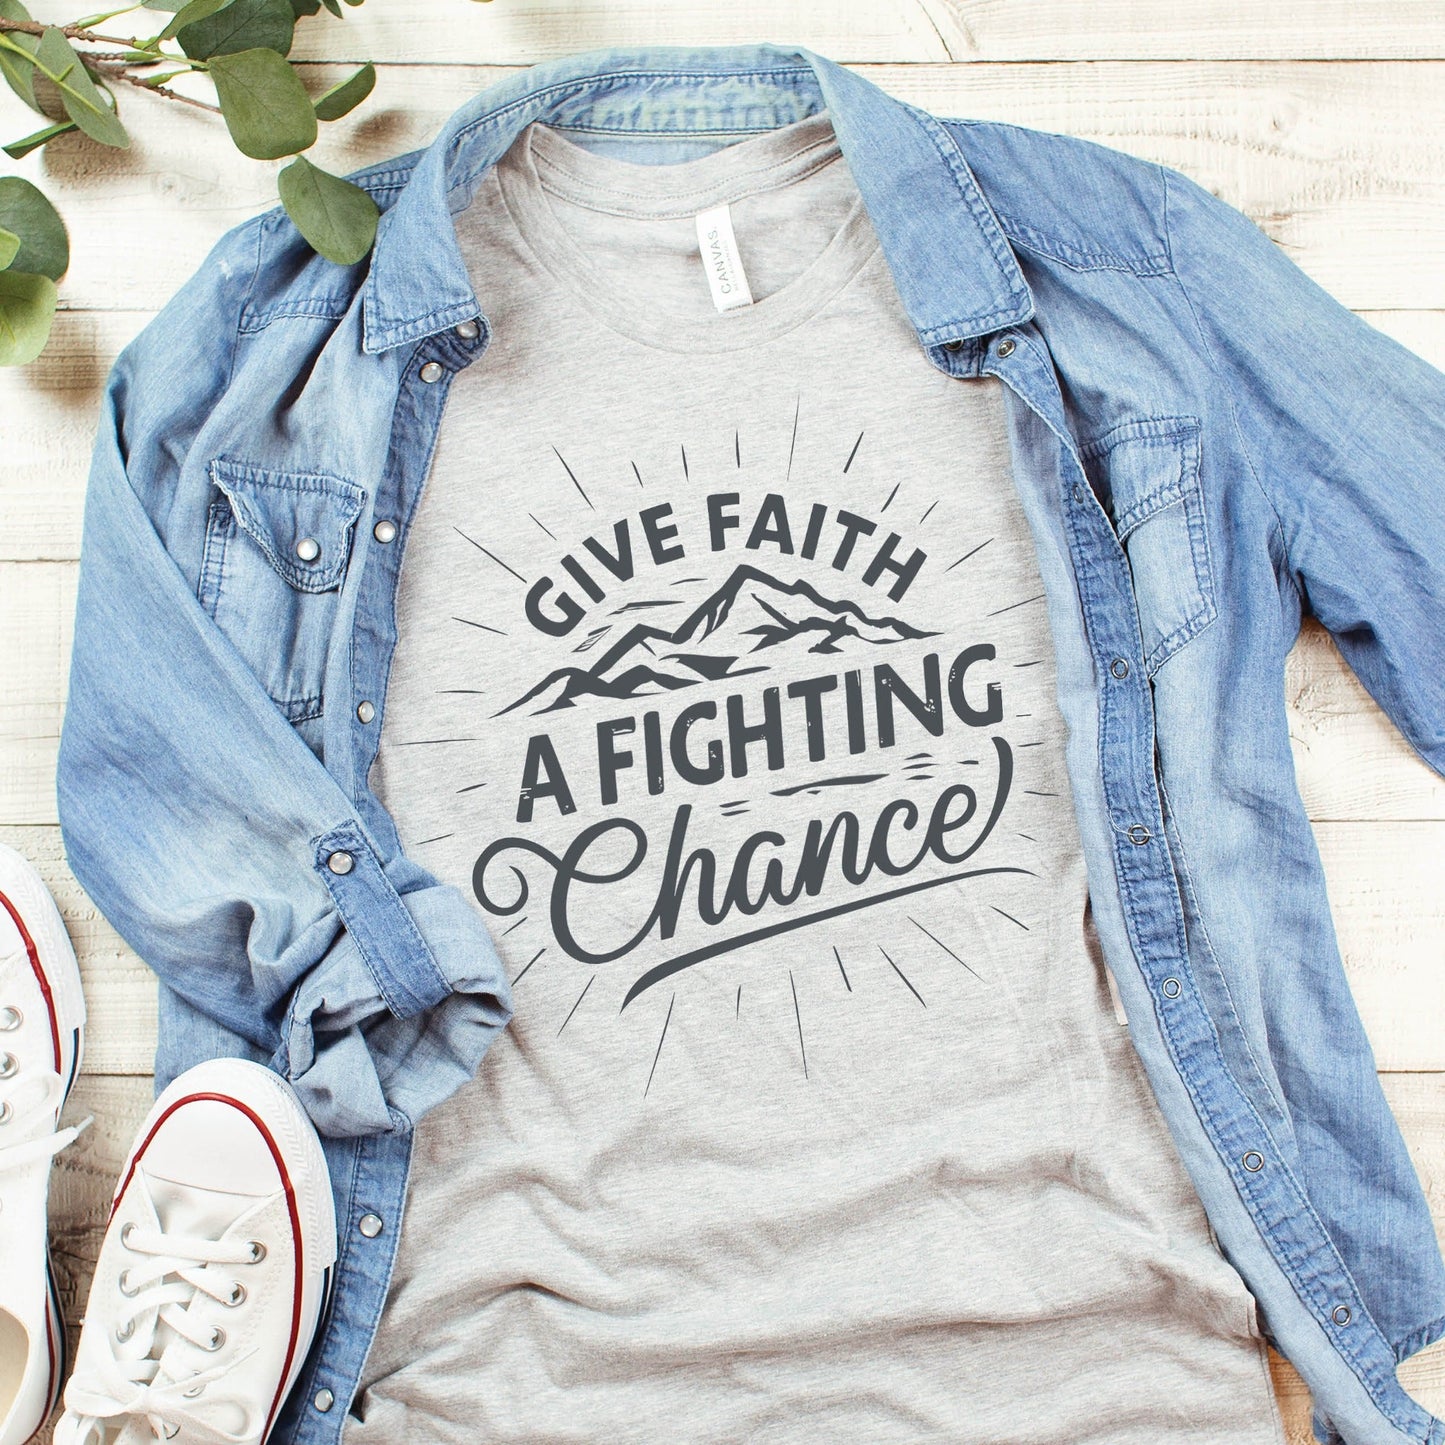 Heather Gray Unisex Tee with Christian Bible verse quote that says, "Give Faith A Fighting Chance" in charcoal gray with retro sunburst and mountain graphics, t-shirt designed for faith-based men and women